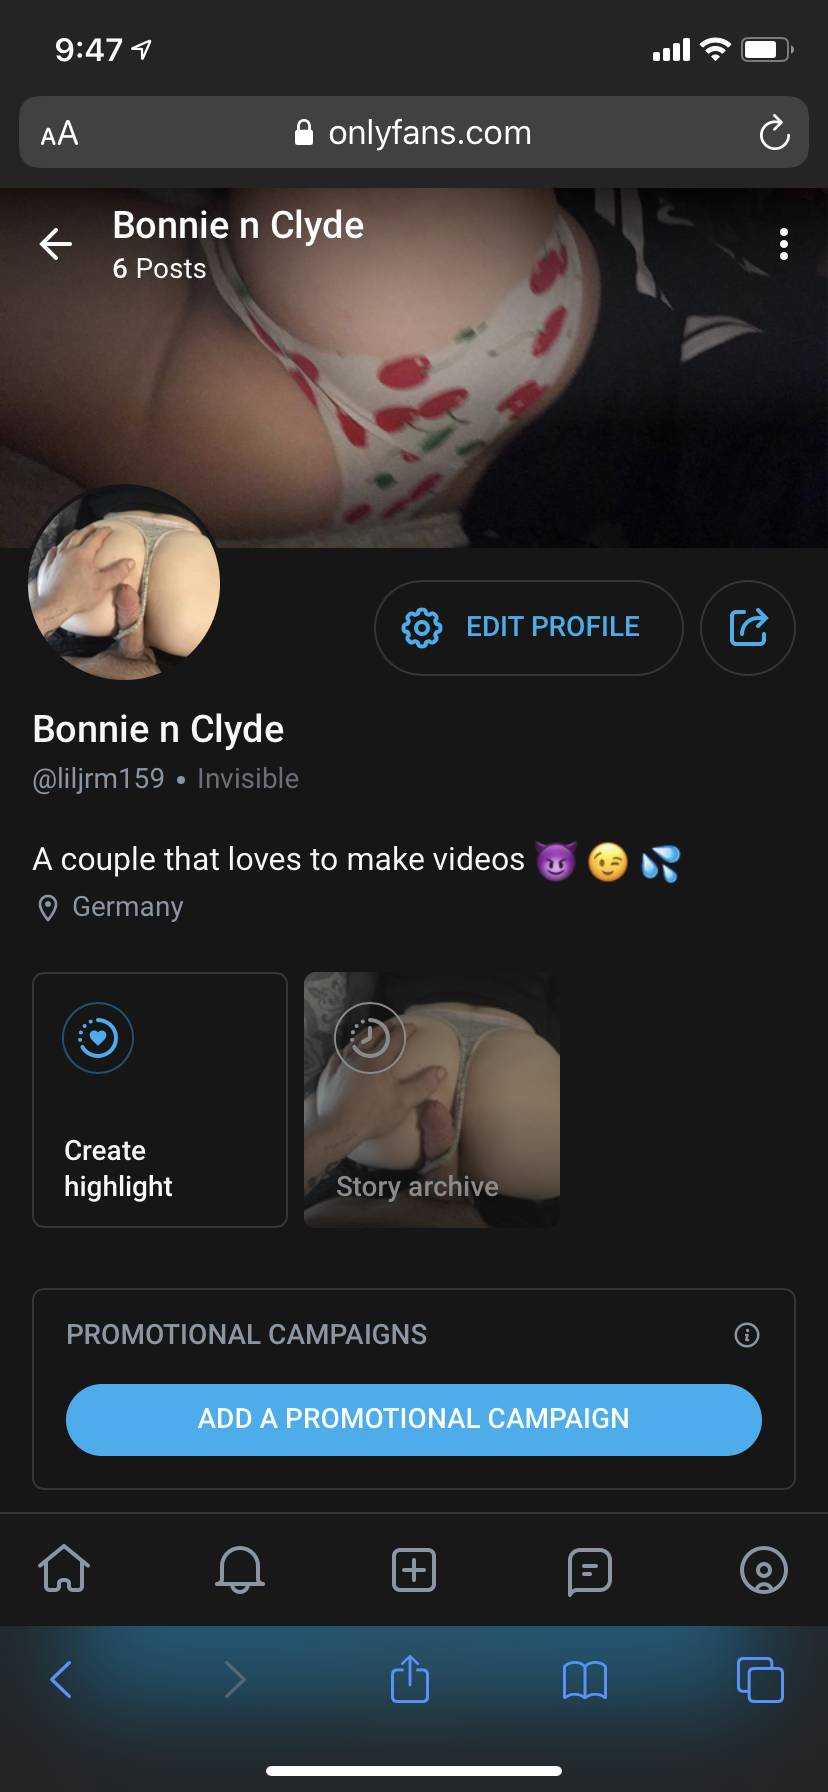 Watch the Photo by Bonnie n clyde with the username @liljman58, posted on August 27, 2020